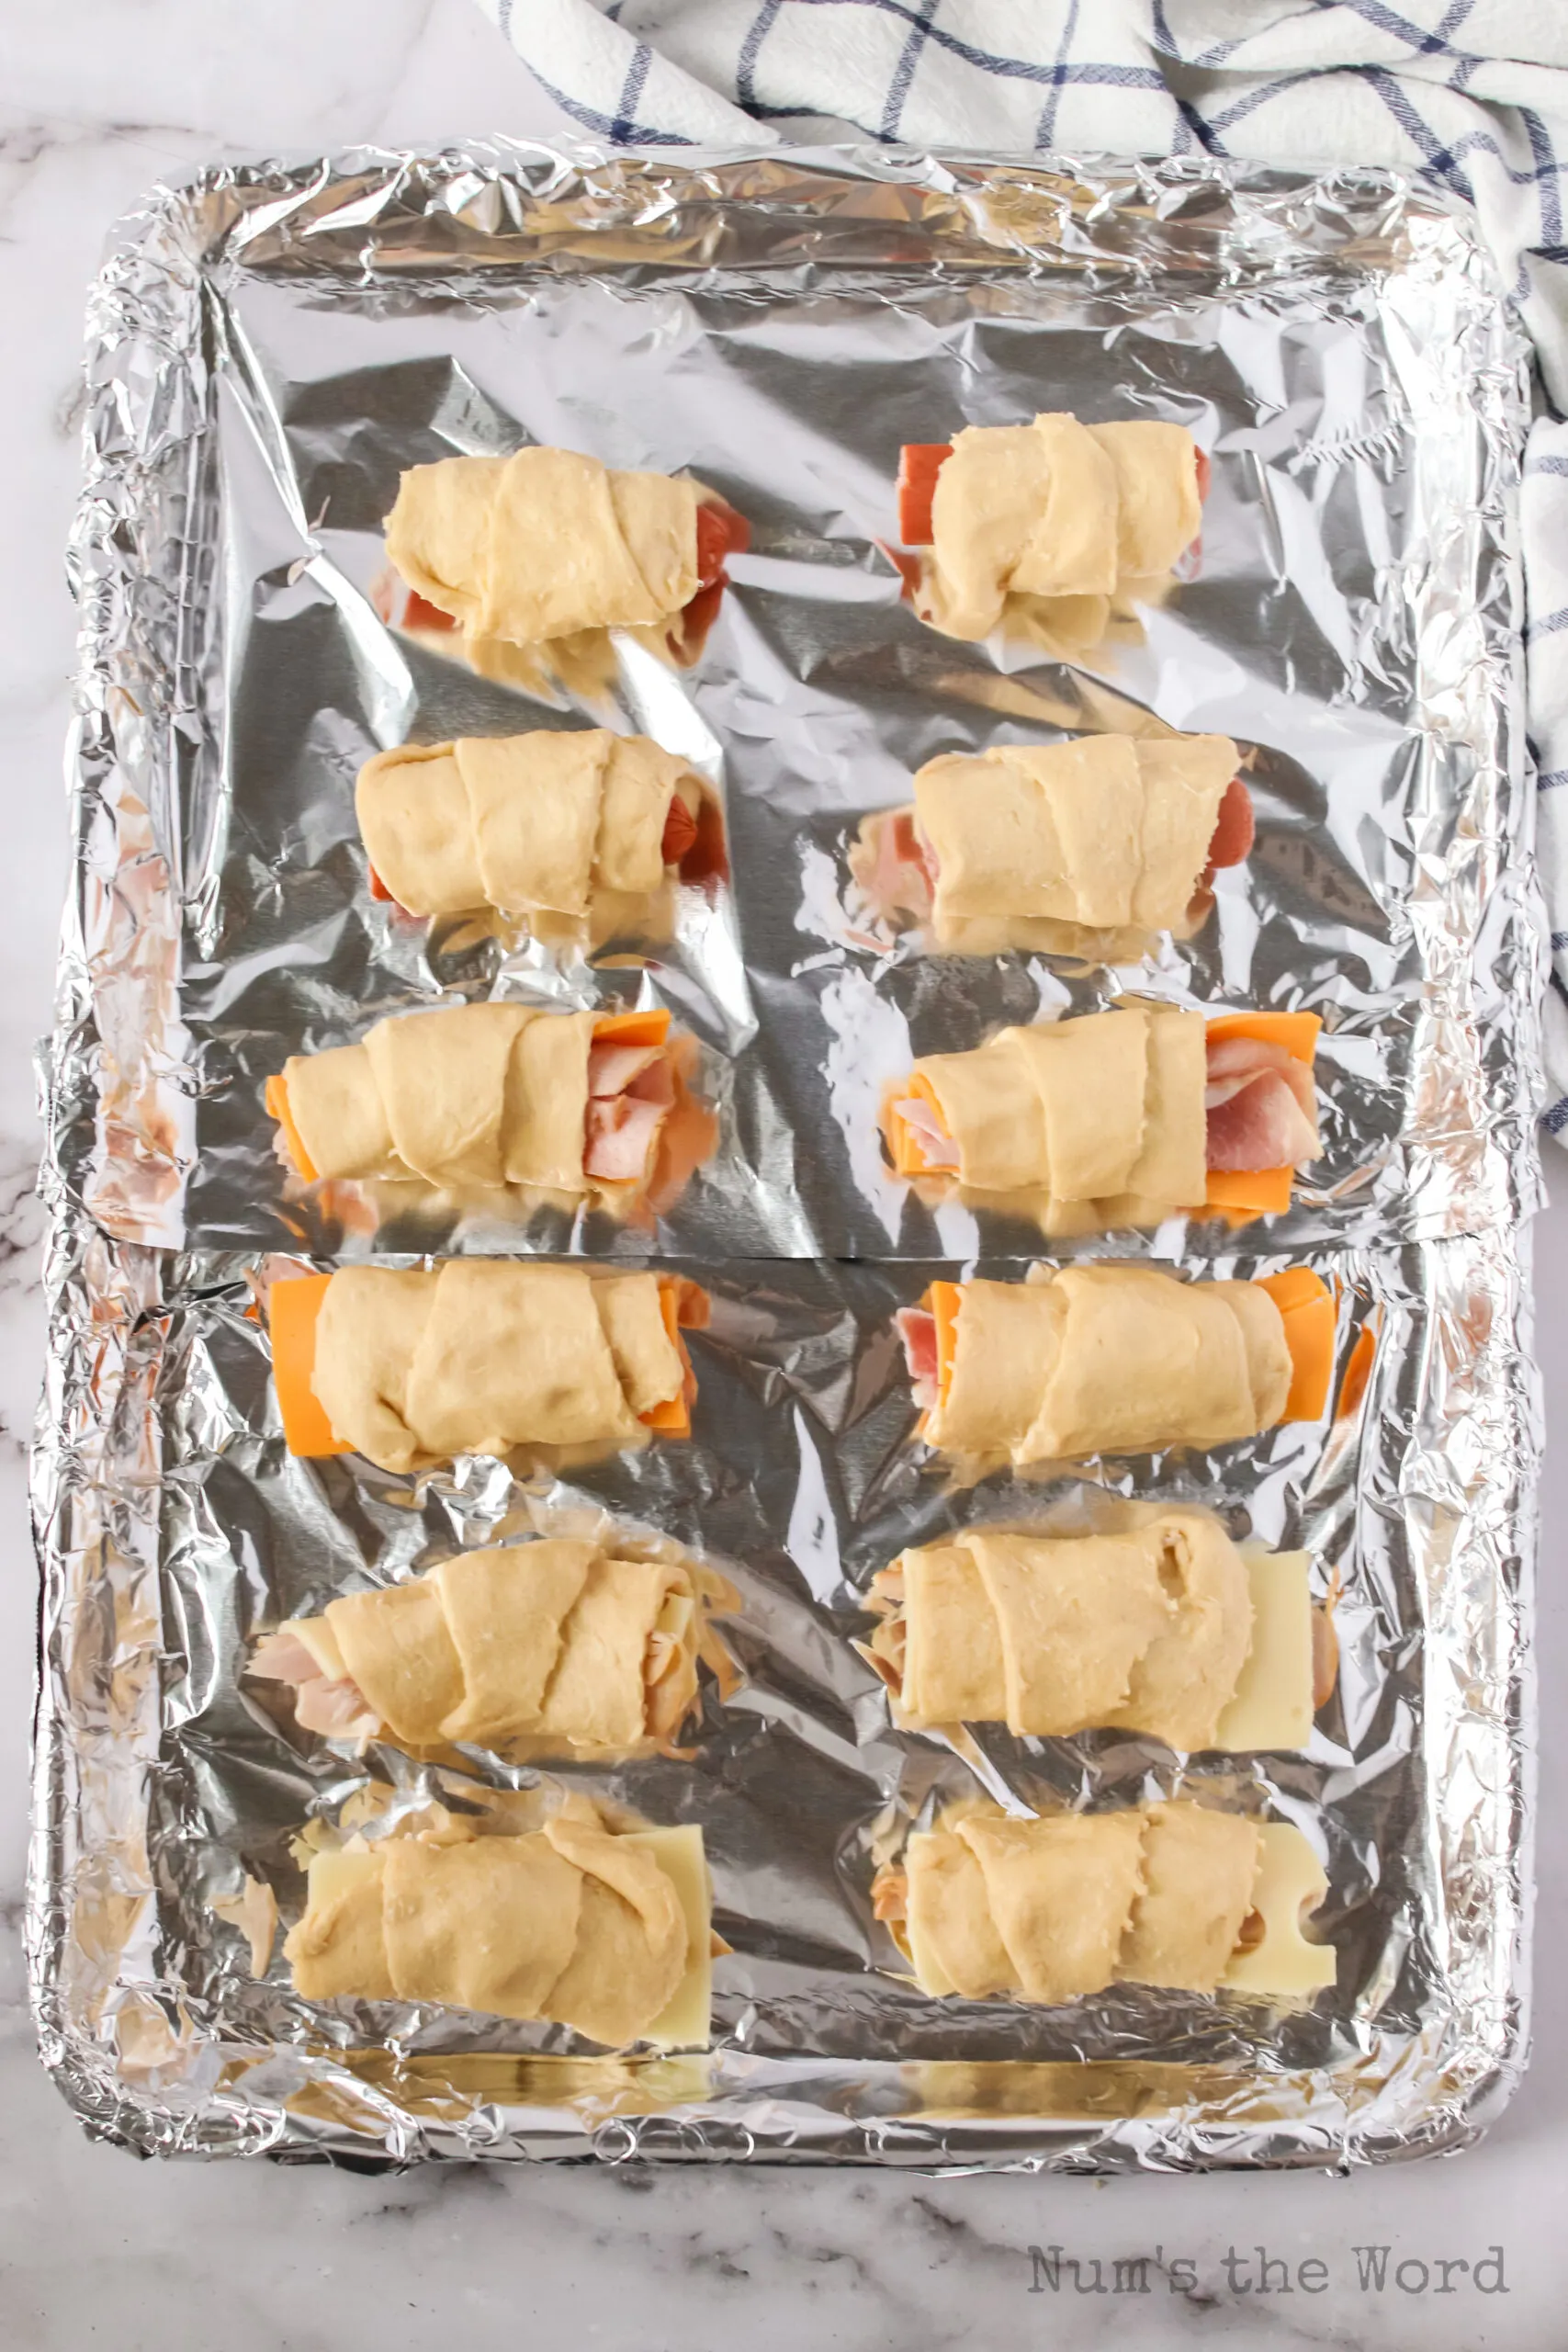 crescent roll ups on a baking tray, unbaked